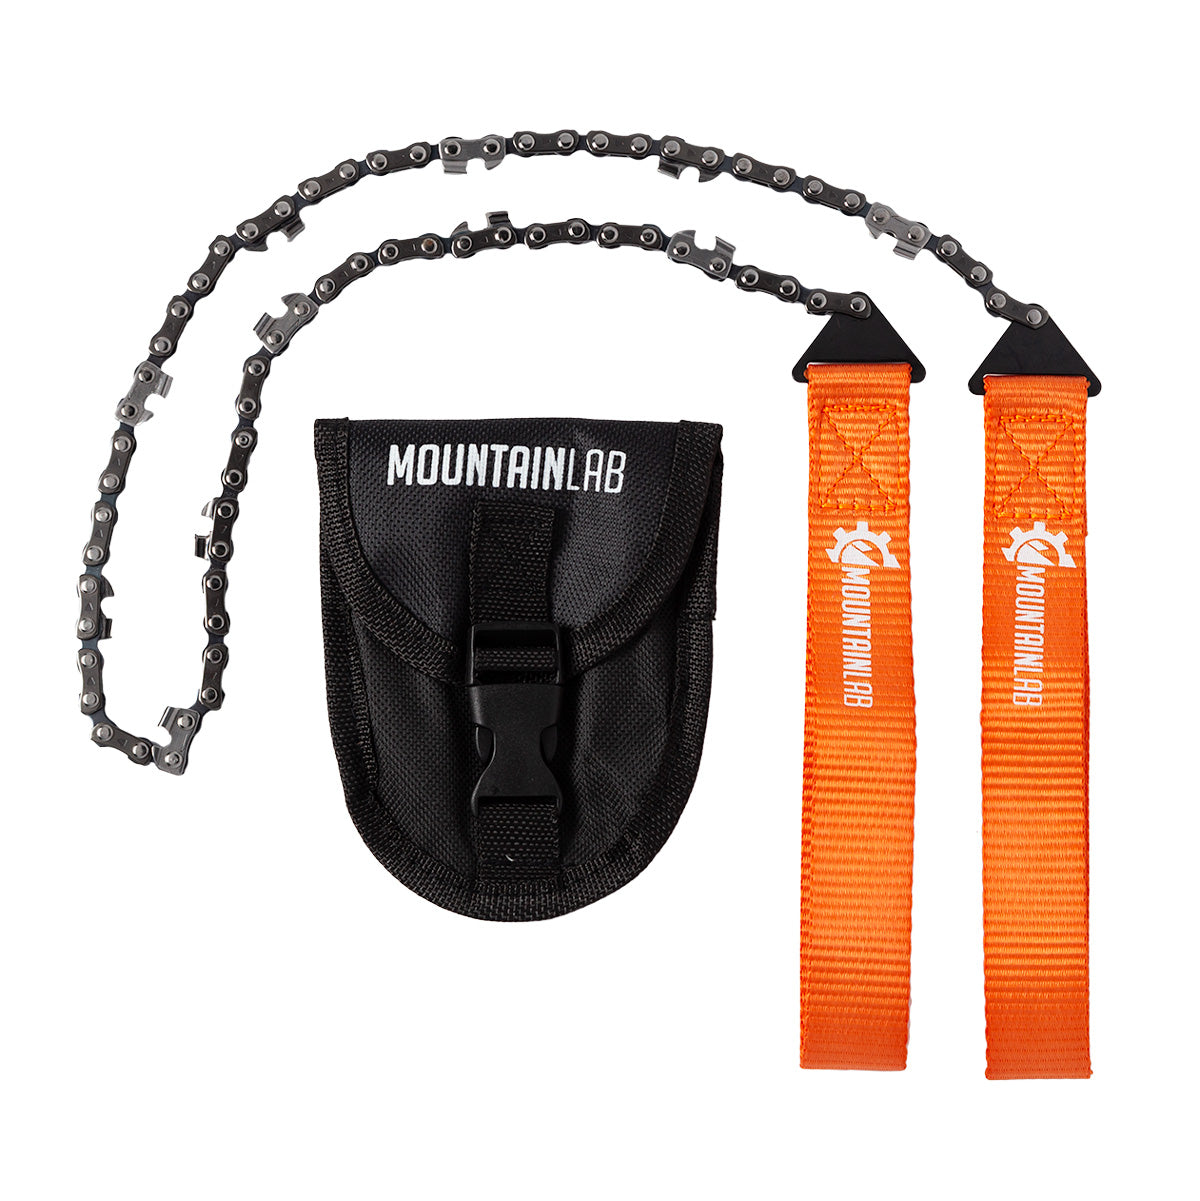 Mountain Lab Backcountry Chainsaw MTN-LAB-SAW1